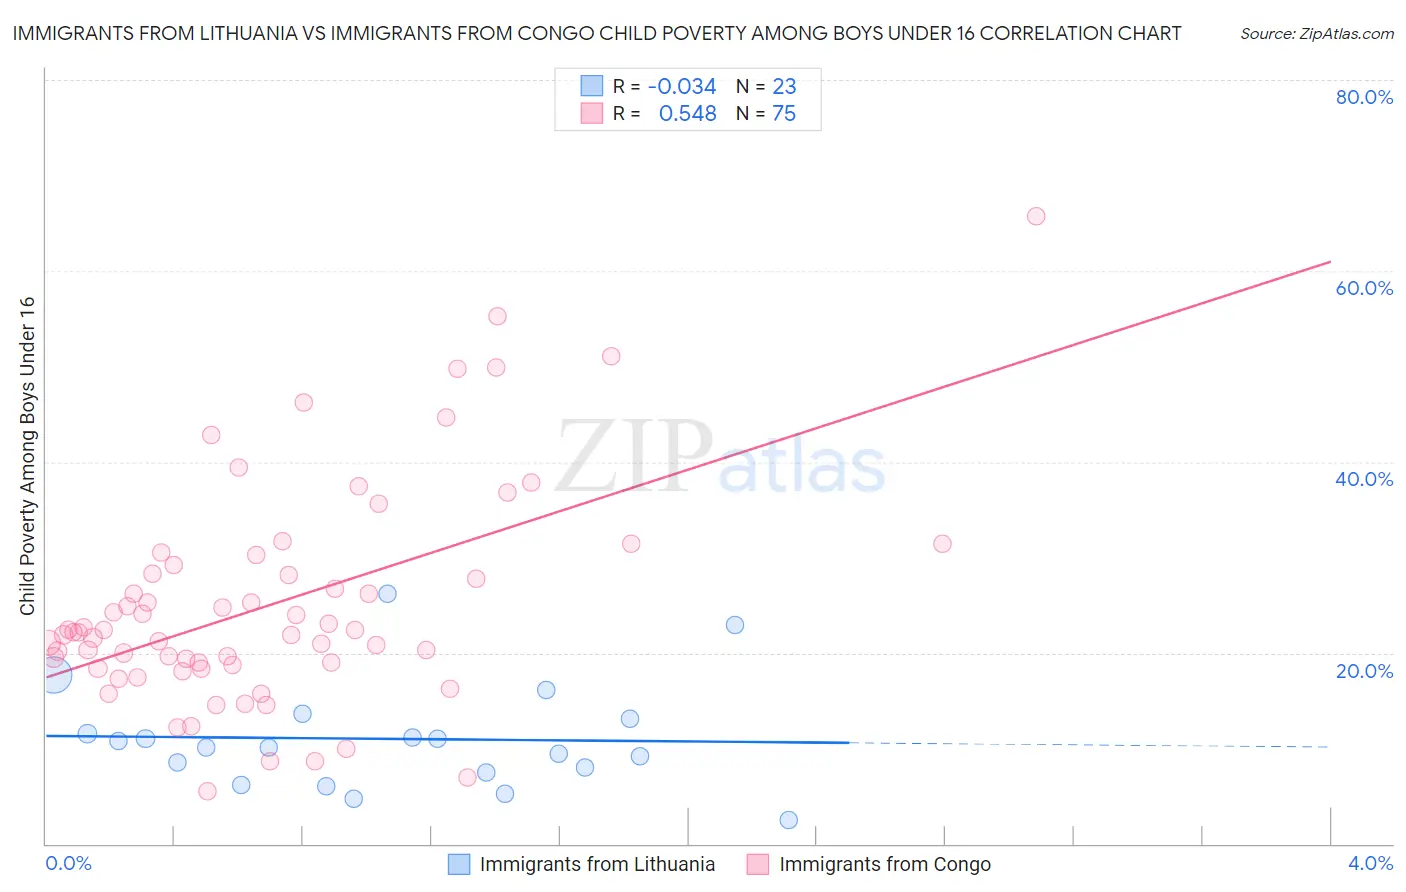 Immigrants from Lithuania vs Immigrants from Congo Child Poverty Among Boys Under 16